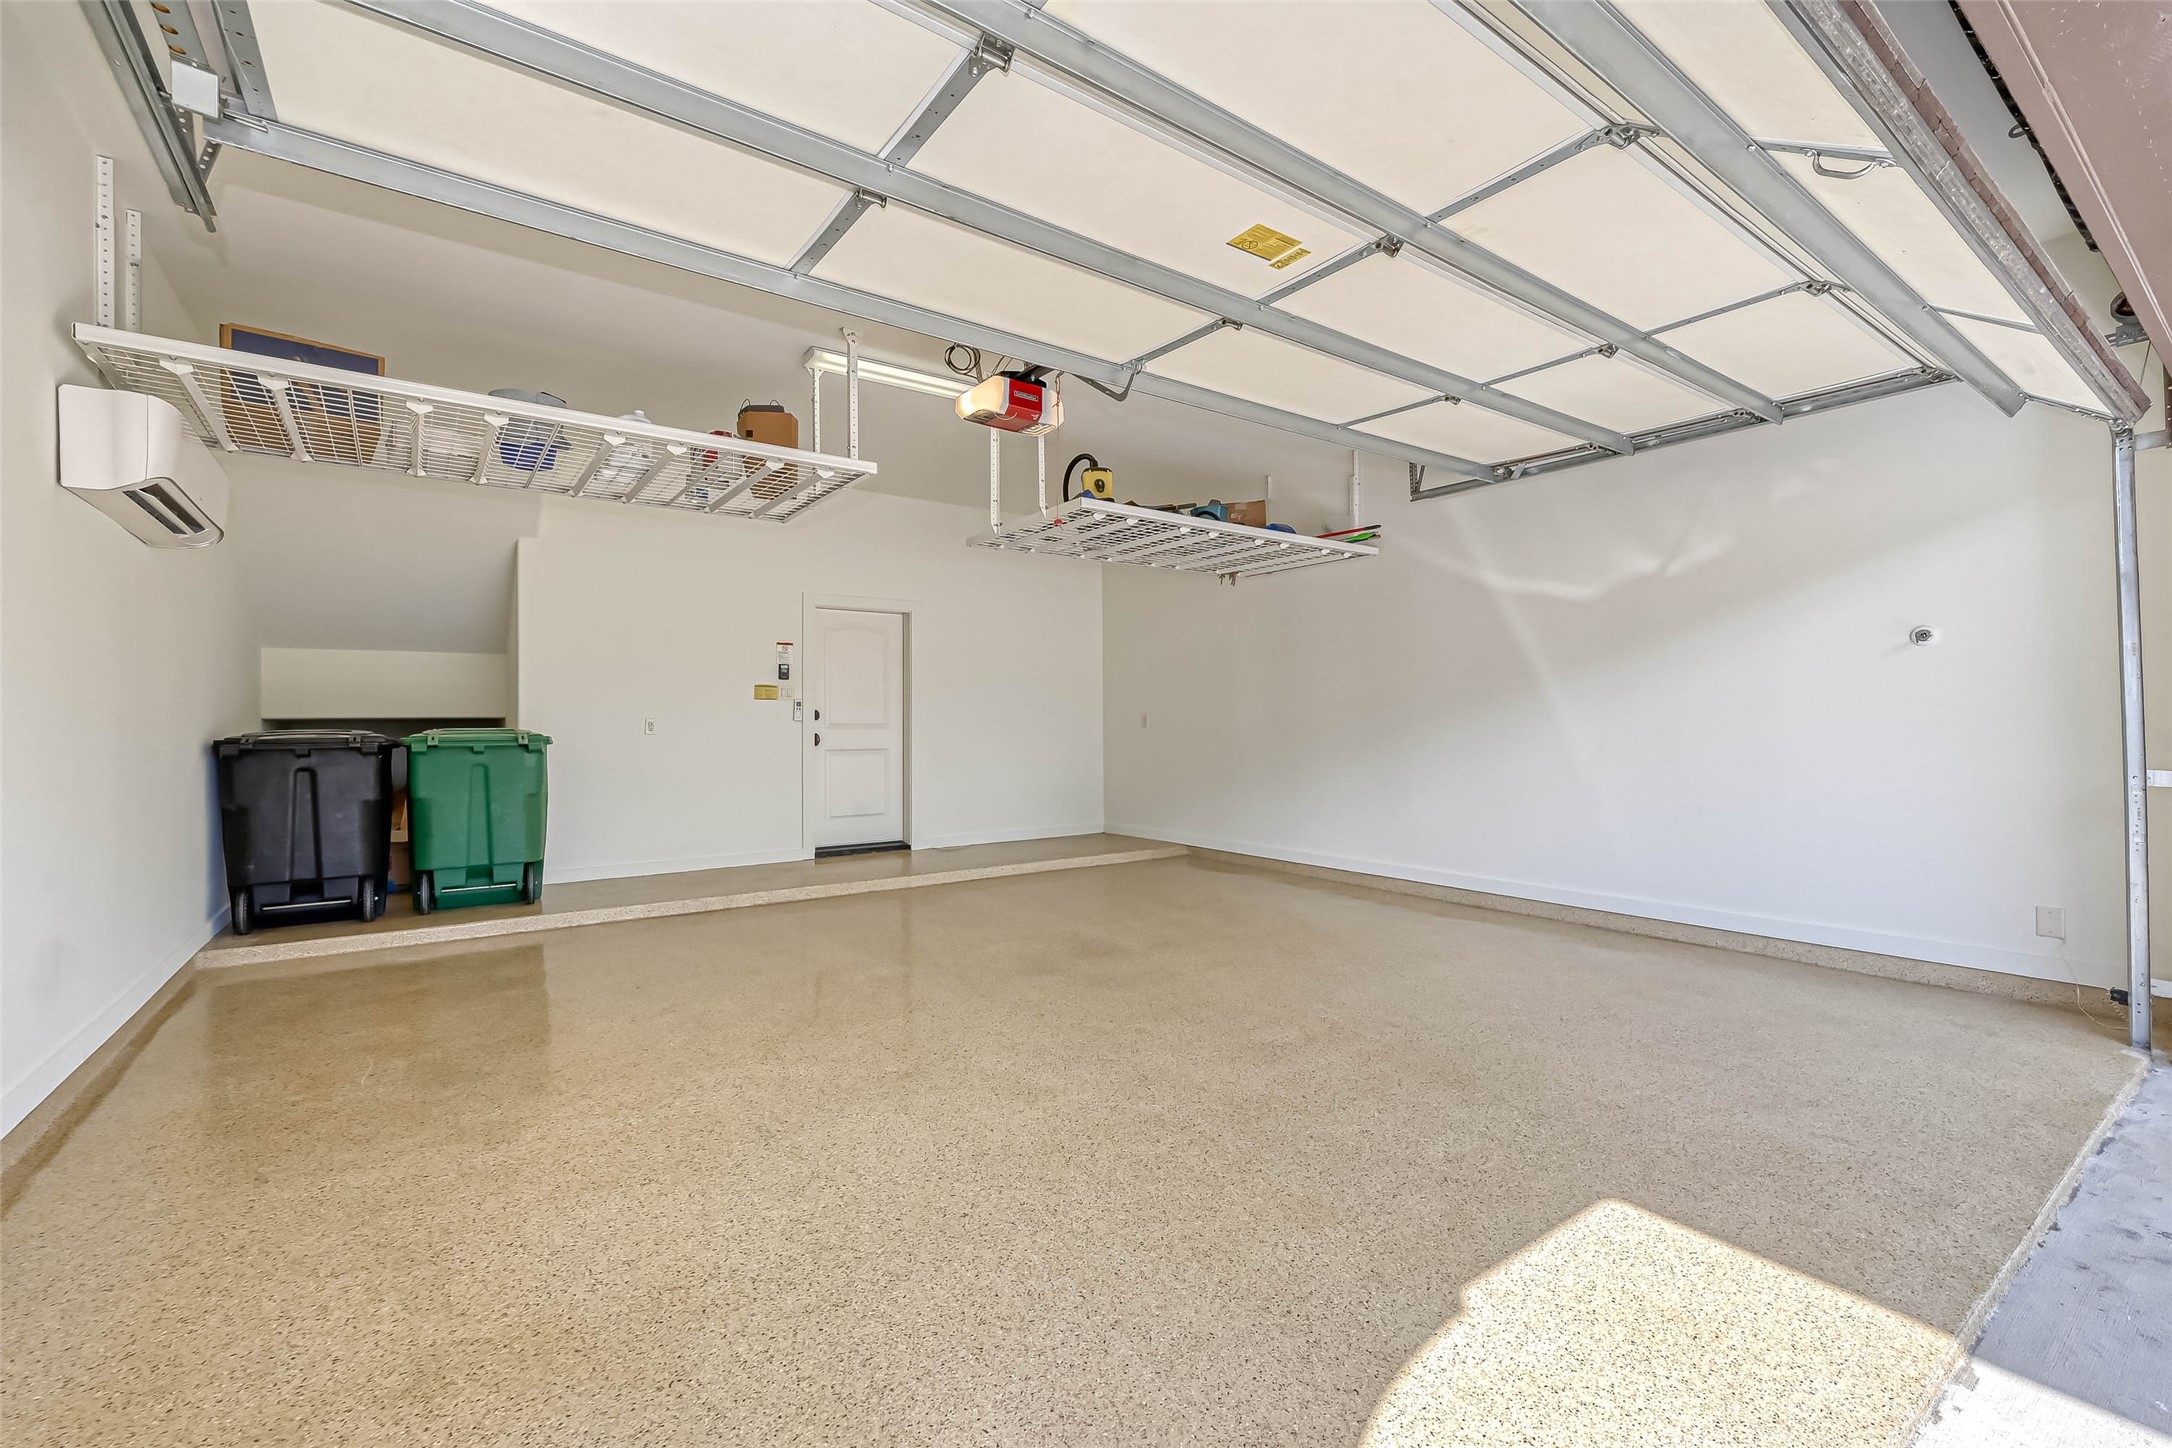 Garage has epoxy flooring, above storage and is air conditioned